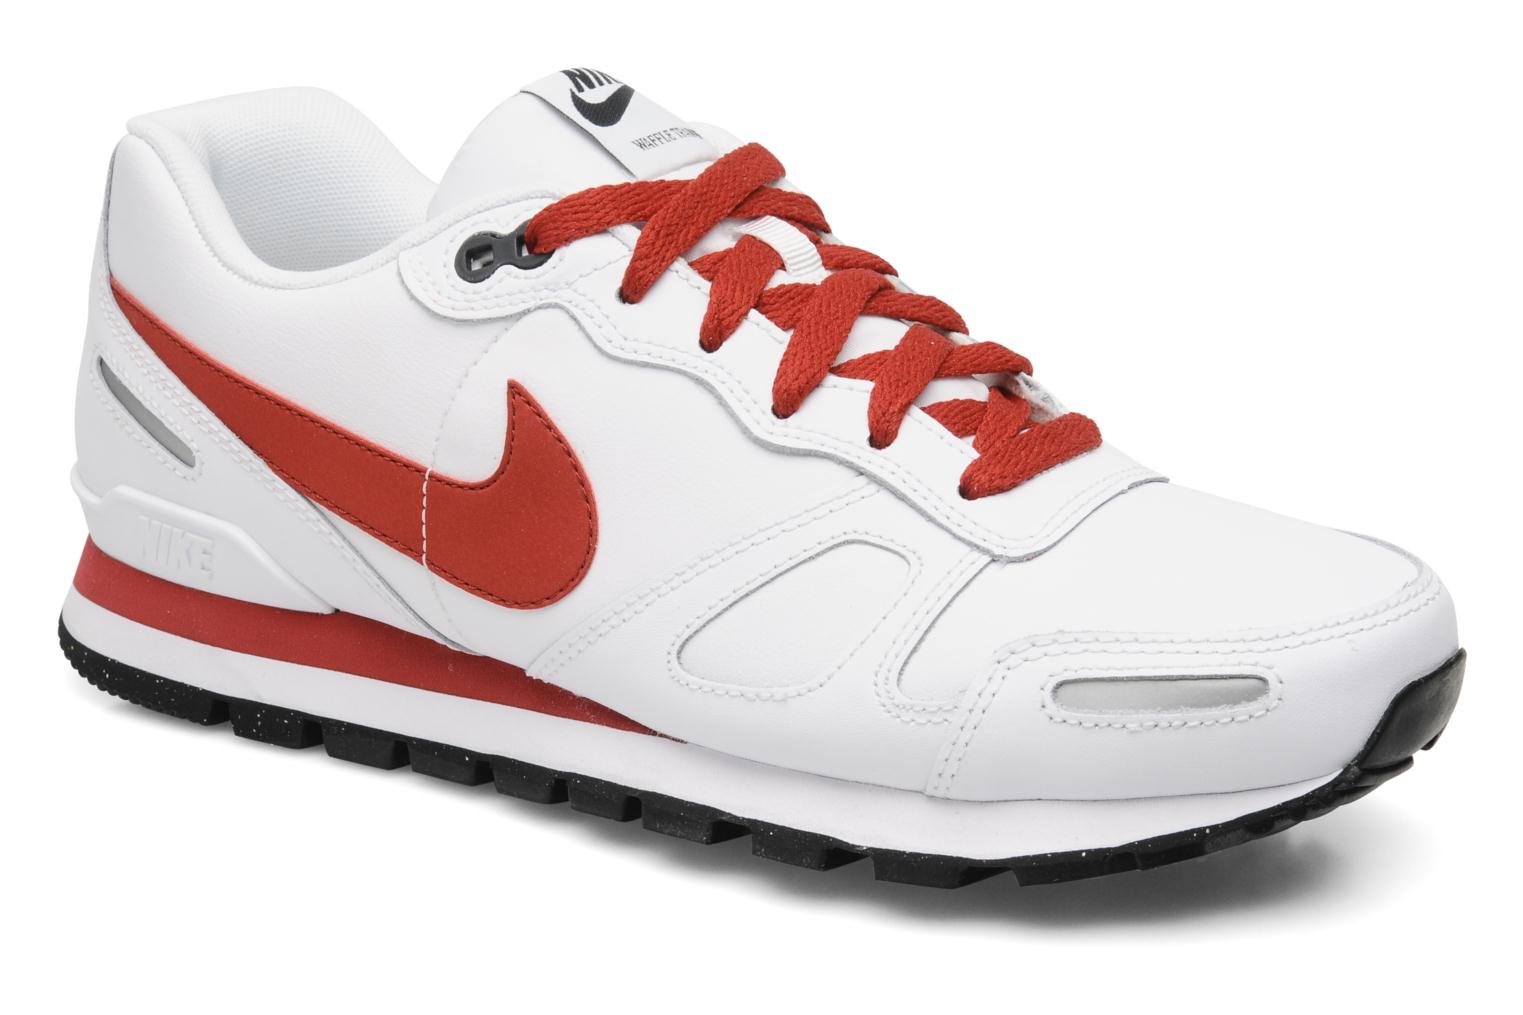 Foto Tenis moda Nike Air waffle trainer leather Hombre foto 413978